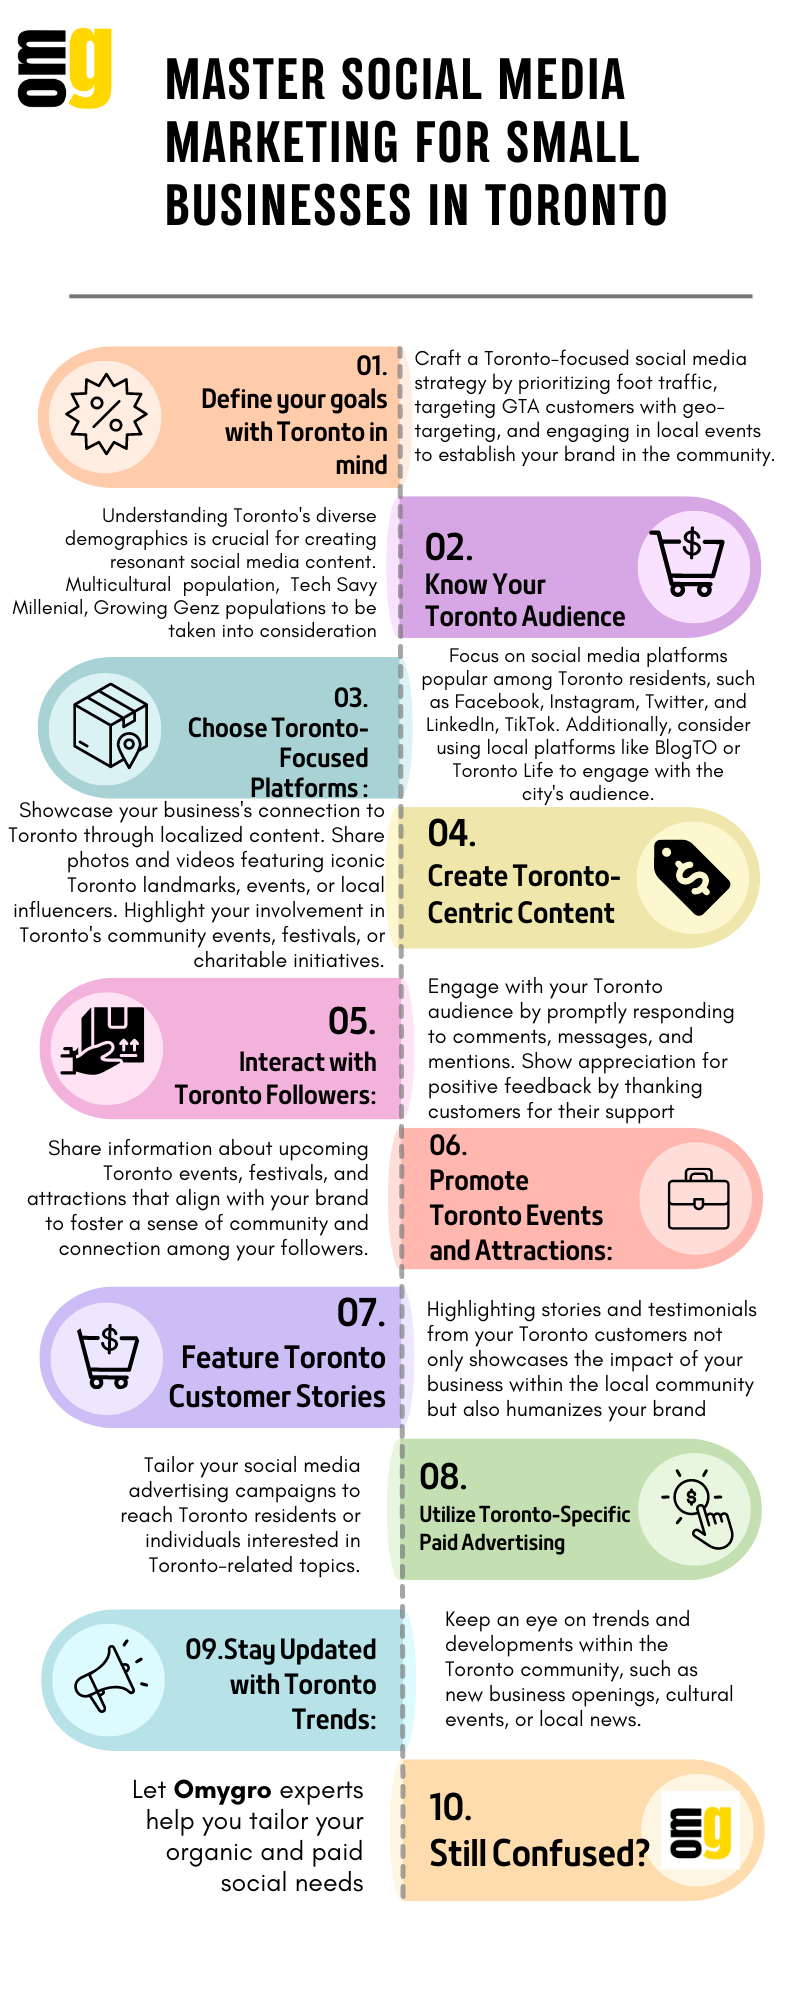 Master-Social-Media-Marketing for Small Businesses in Toronto Infographic by Omygro